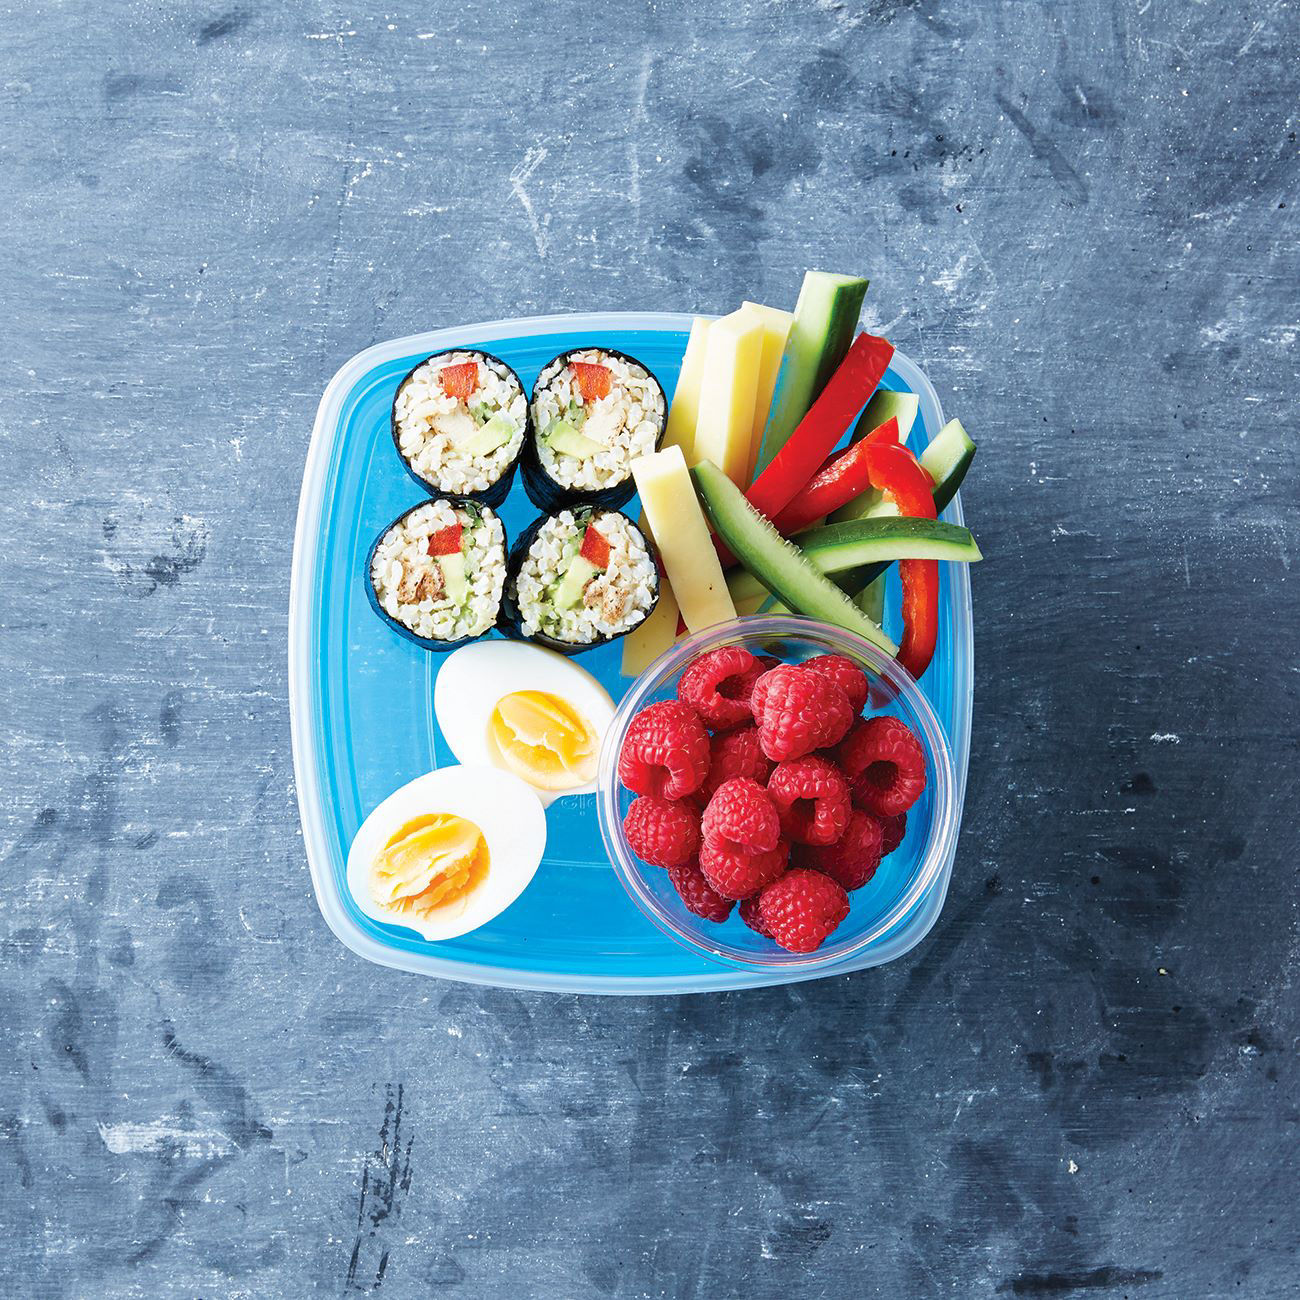 Square Lunch Box Bento - Easy Sushi®